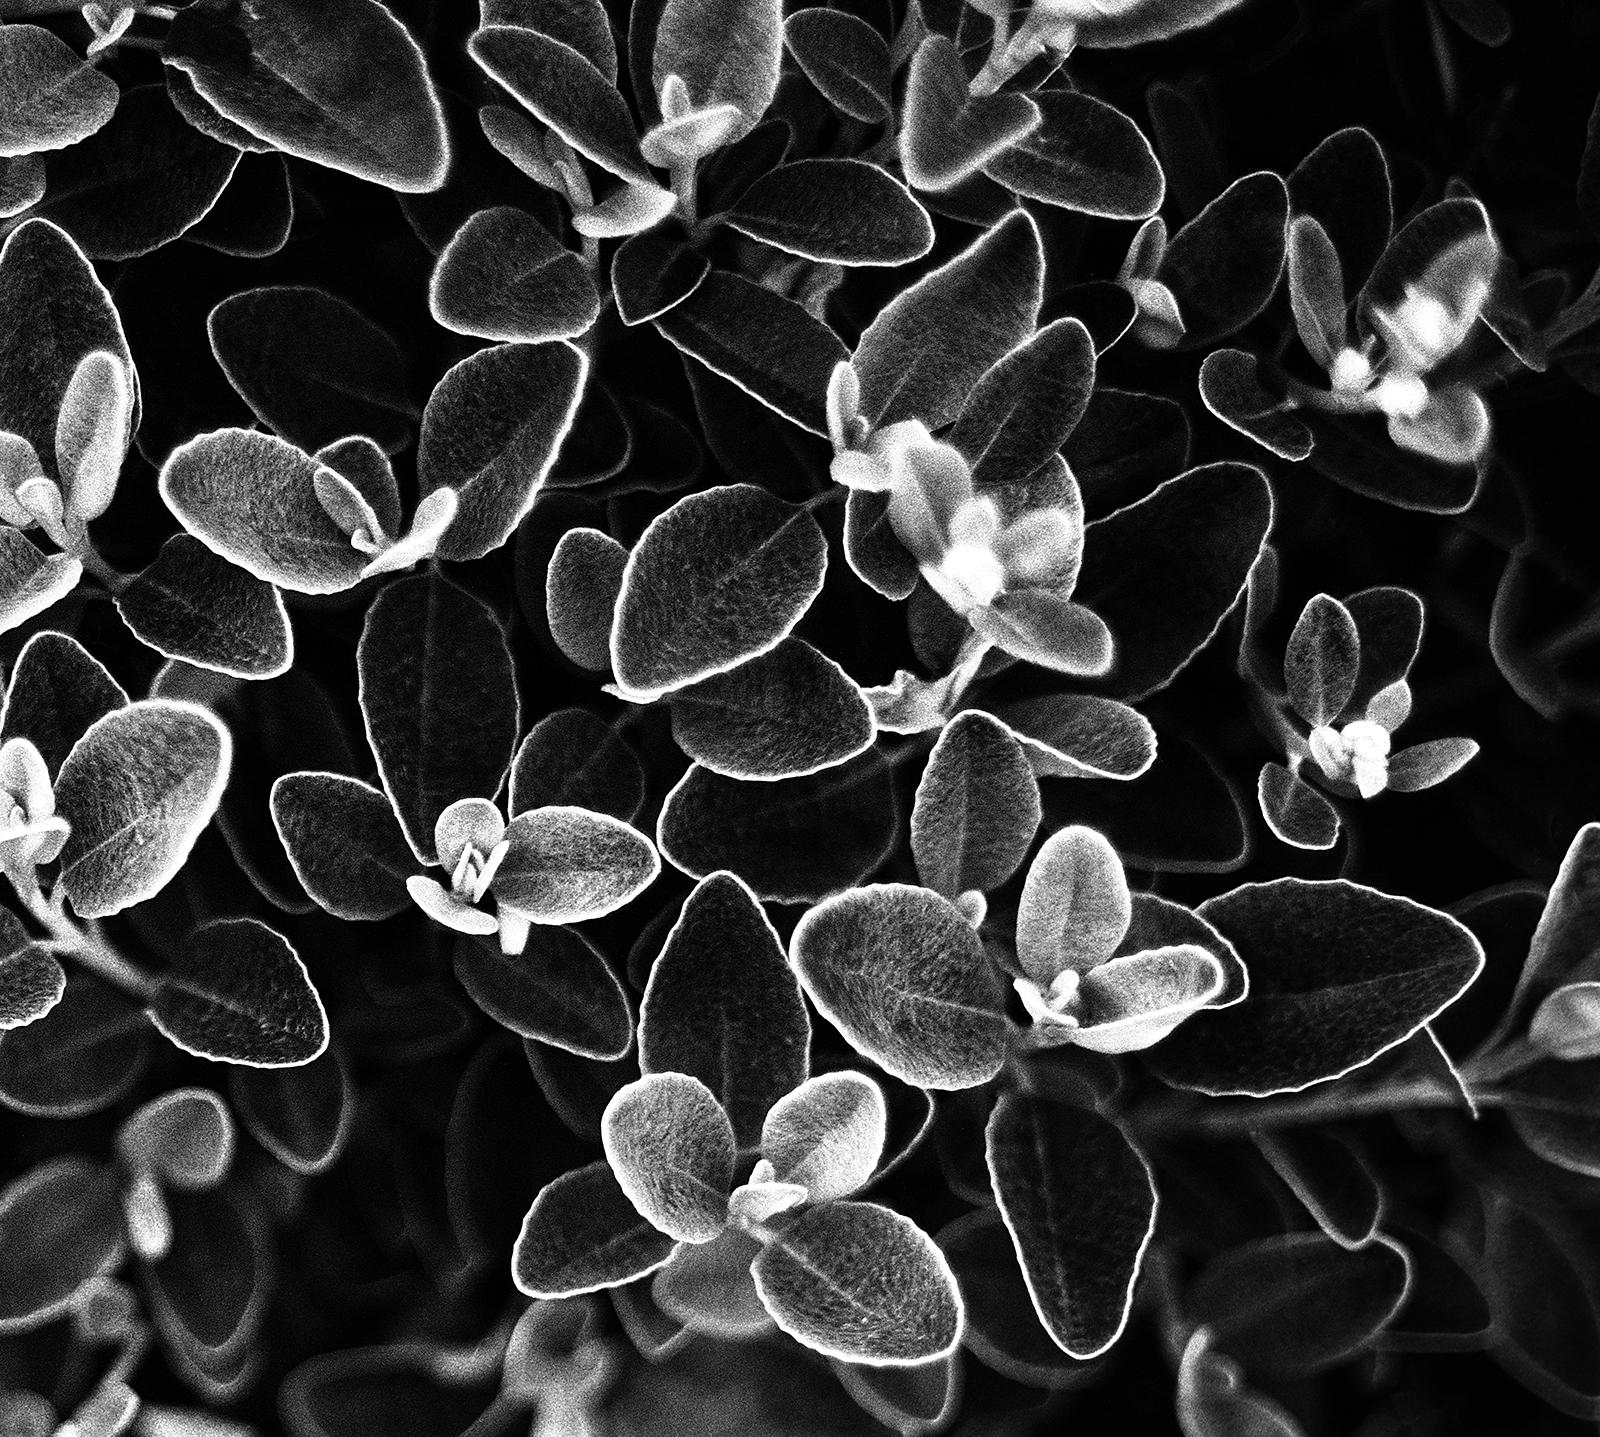 Flower -Signed limited edition art print, Black white nature photo, Contemporary - Photograph by Ian Sanderson